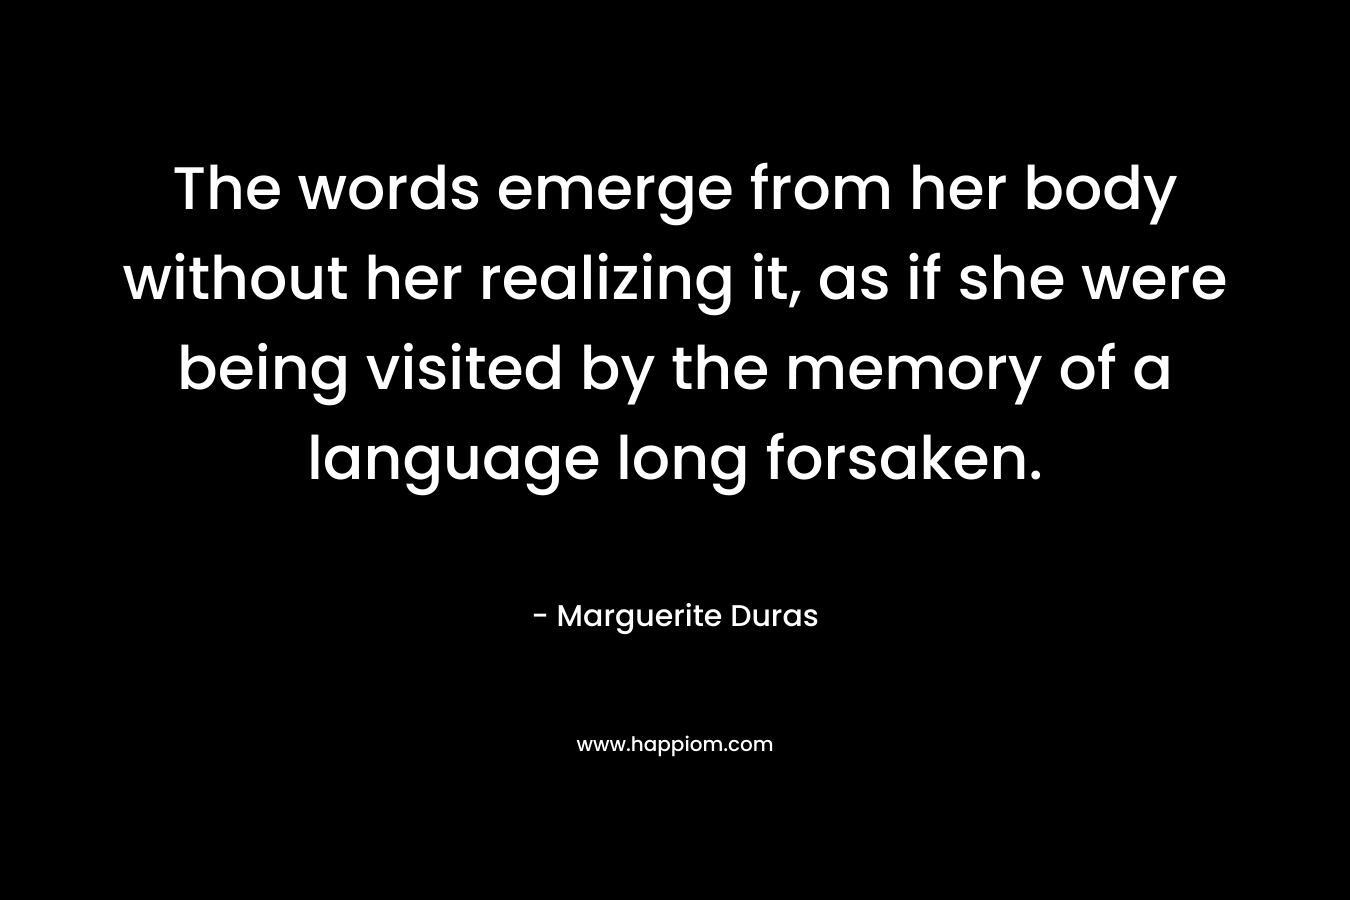 The words emerge from her body without her realizing it, as if she were being visited by the memory of a language long forsaken. – Marguerite Duras